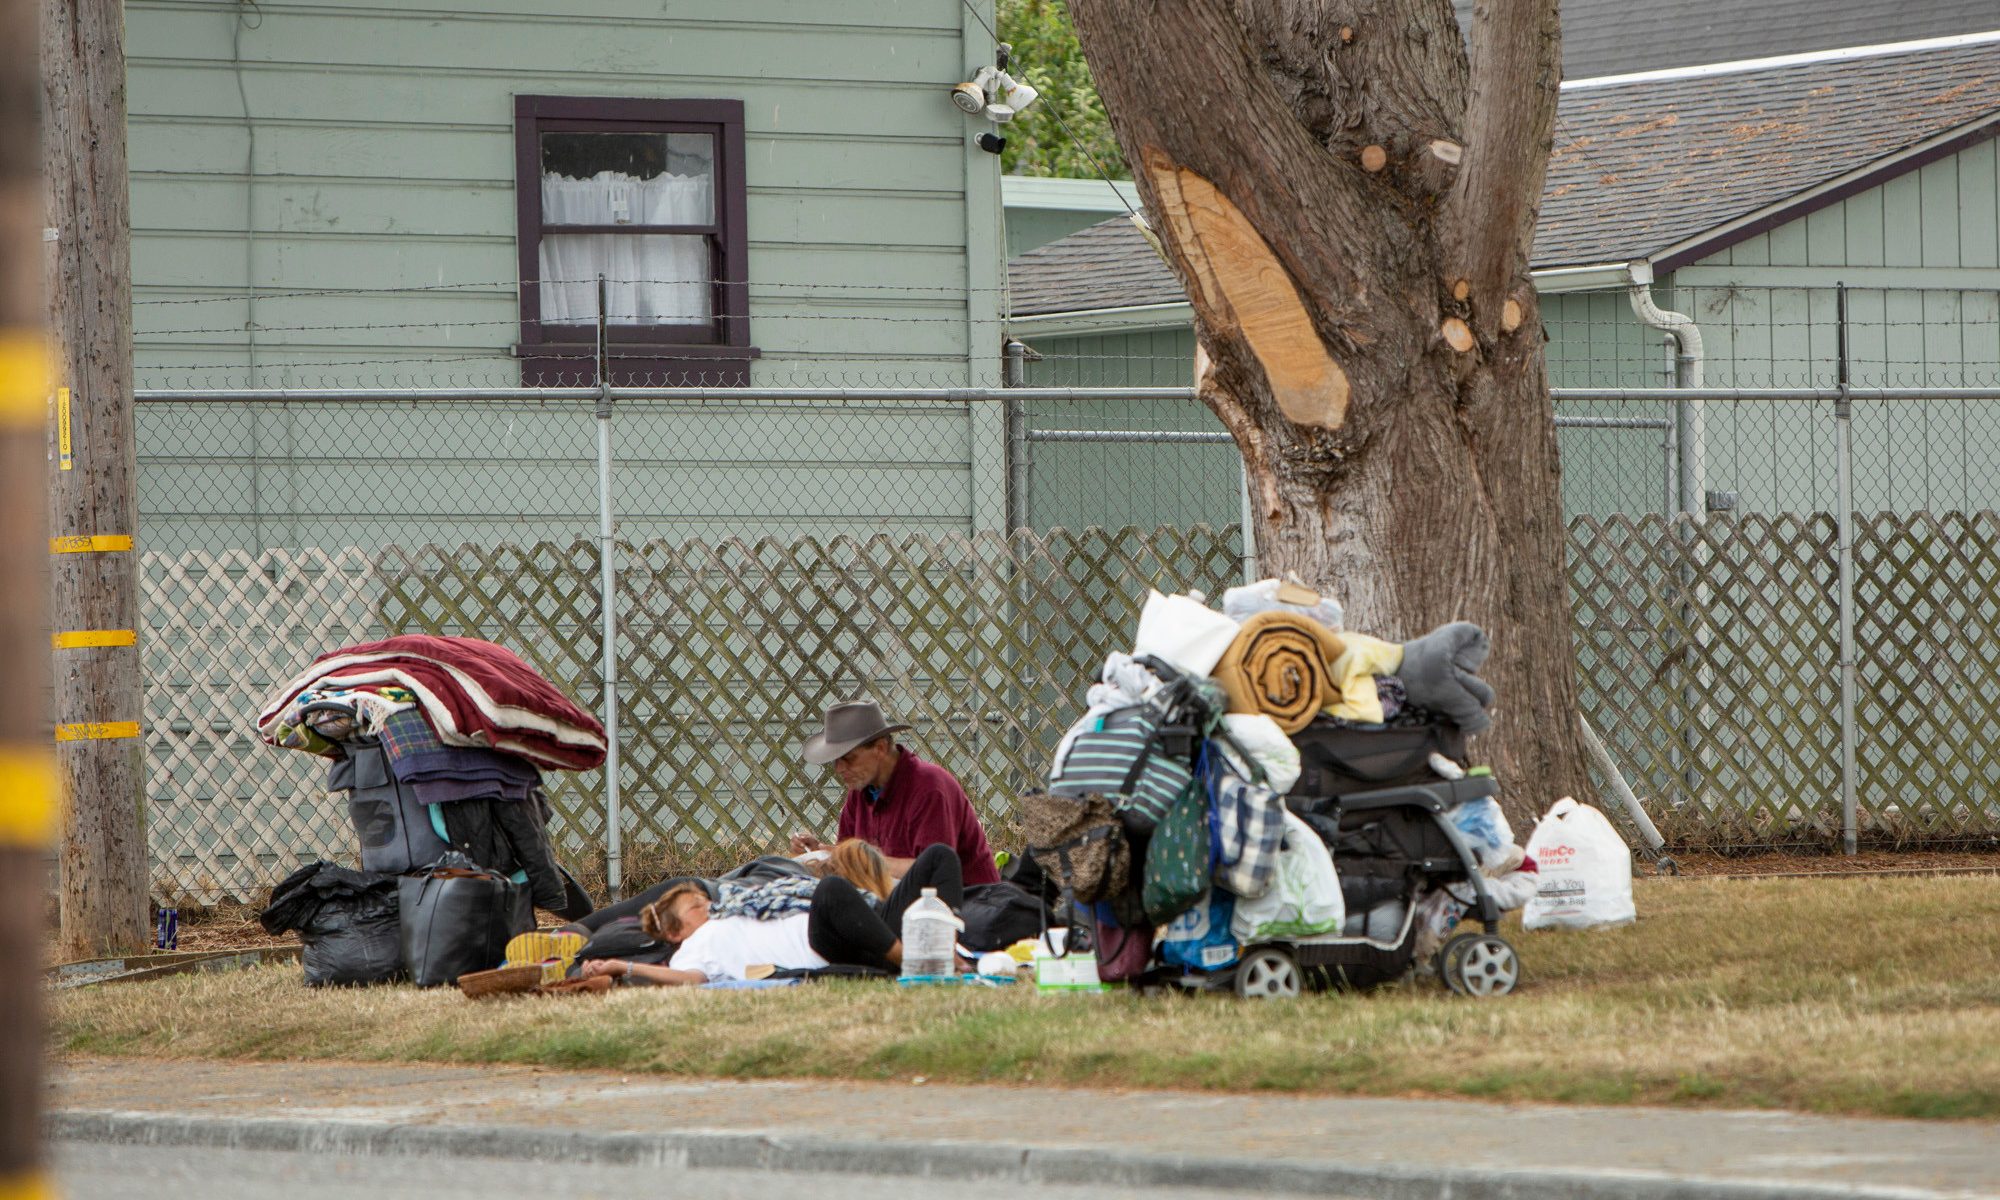 To solve homelessness, Californians must treat certain crimes as cries for help